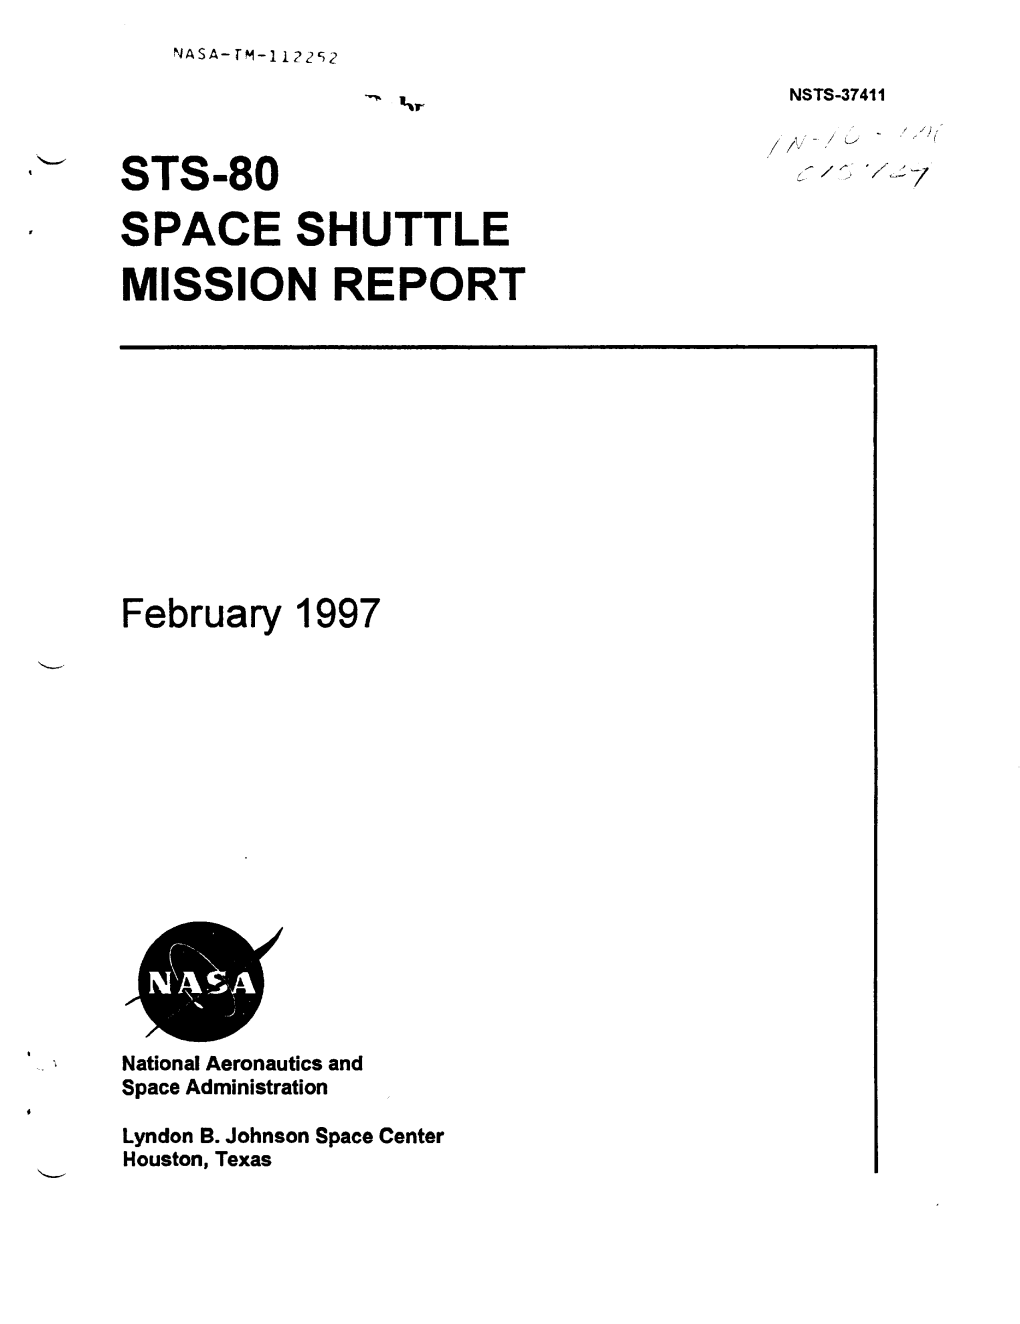 Sts-80 Space Shuttle Mission Report